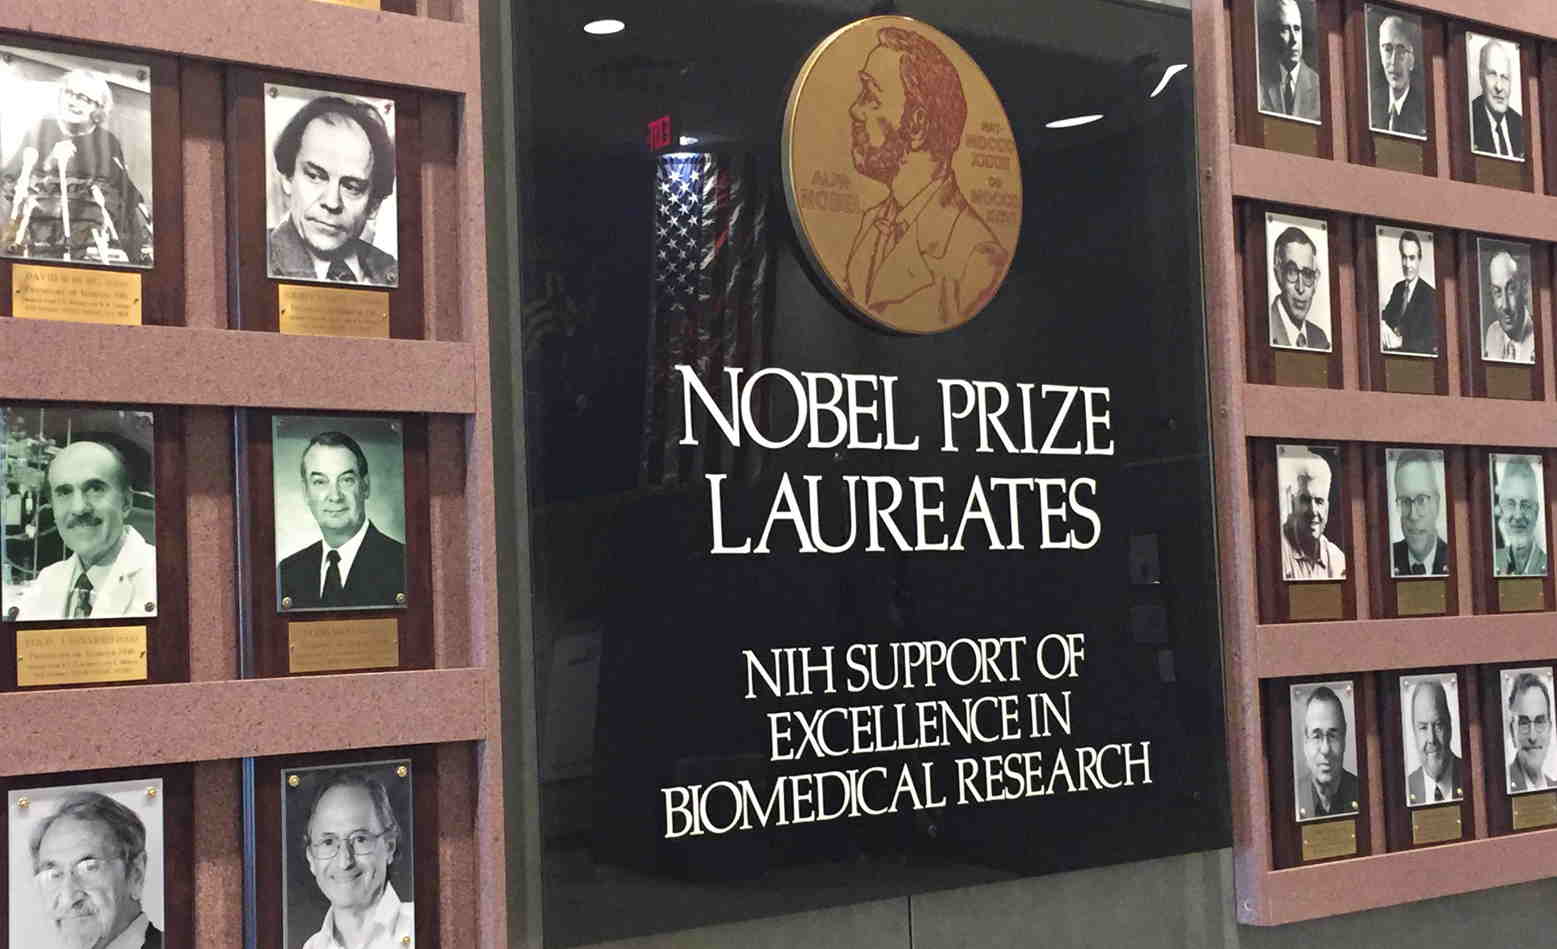 Wall plaque reading "Nobel Prize Laureates" surrounded by framed b+w photos of white men